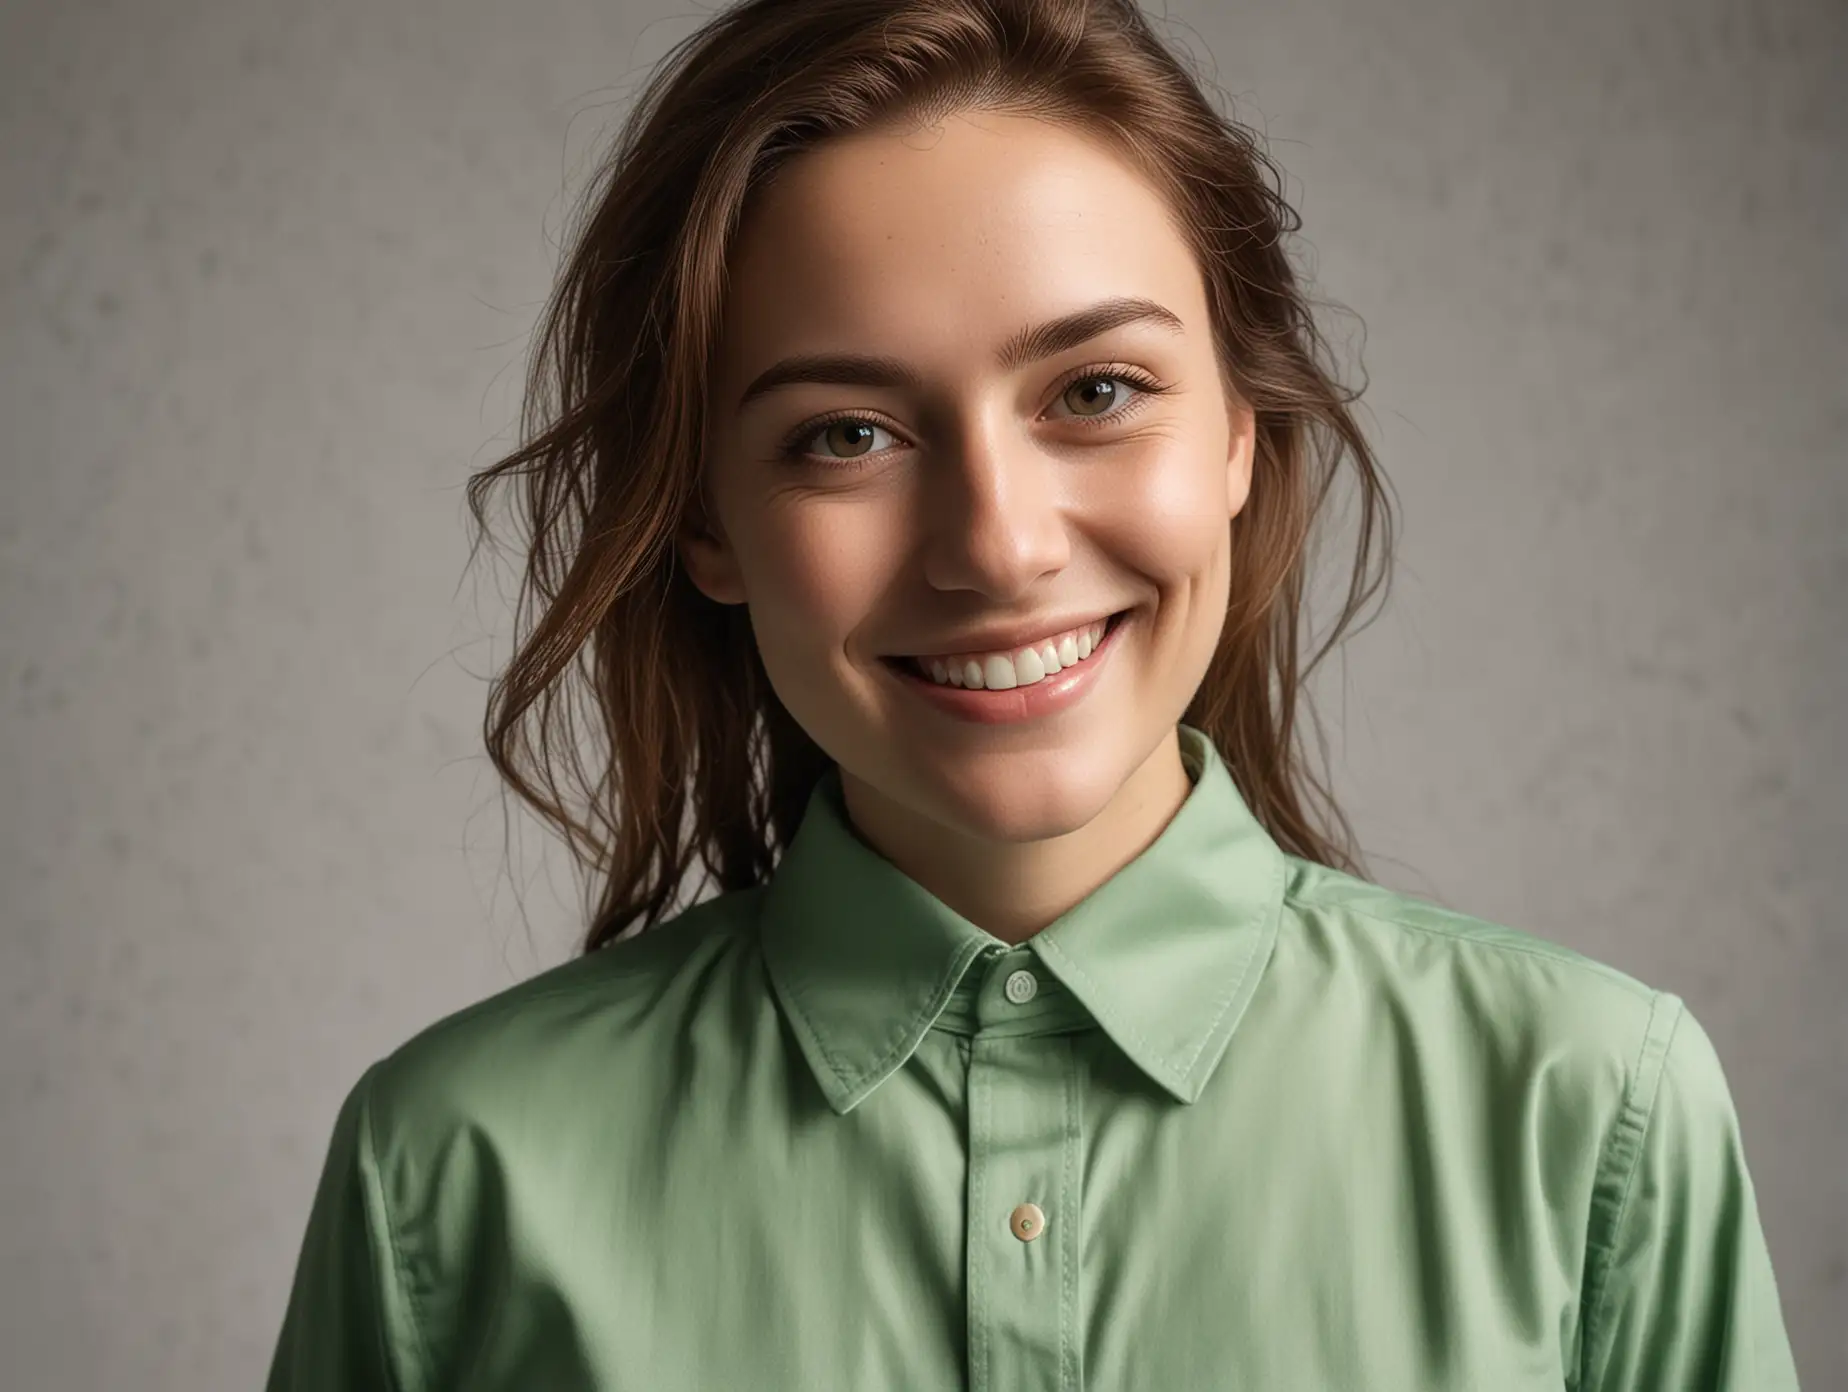 Portrait of a Modern Smiling Individual in a Fine Green Porcelain Shirt